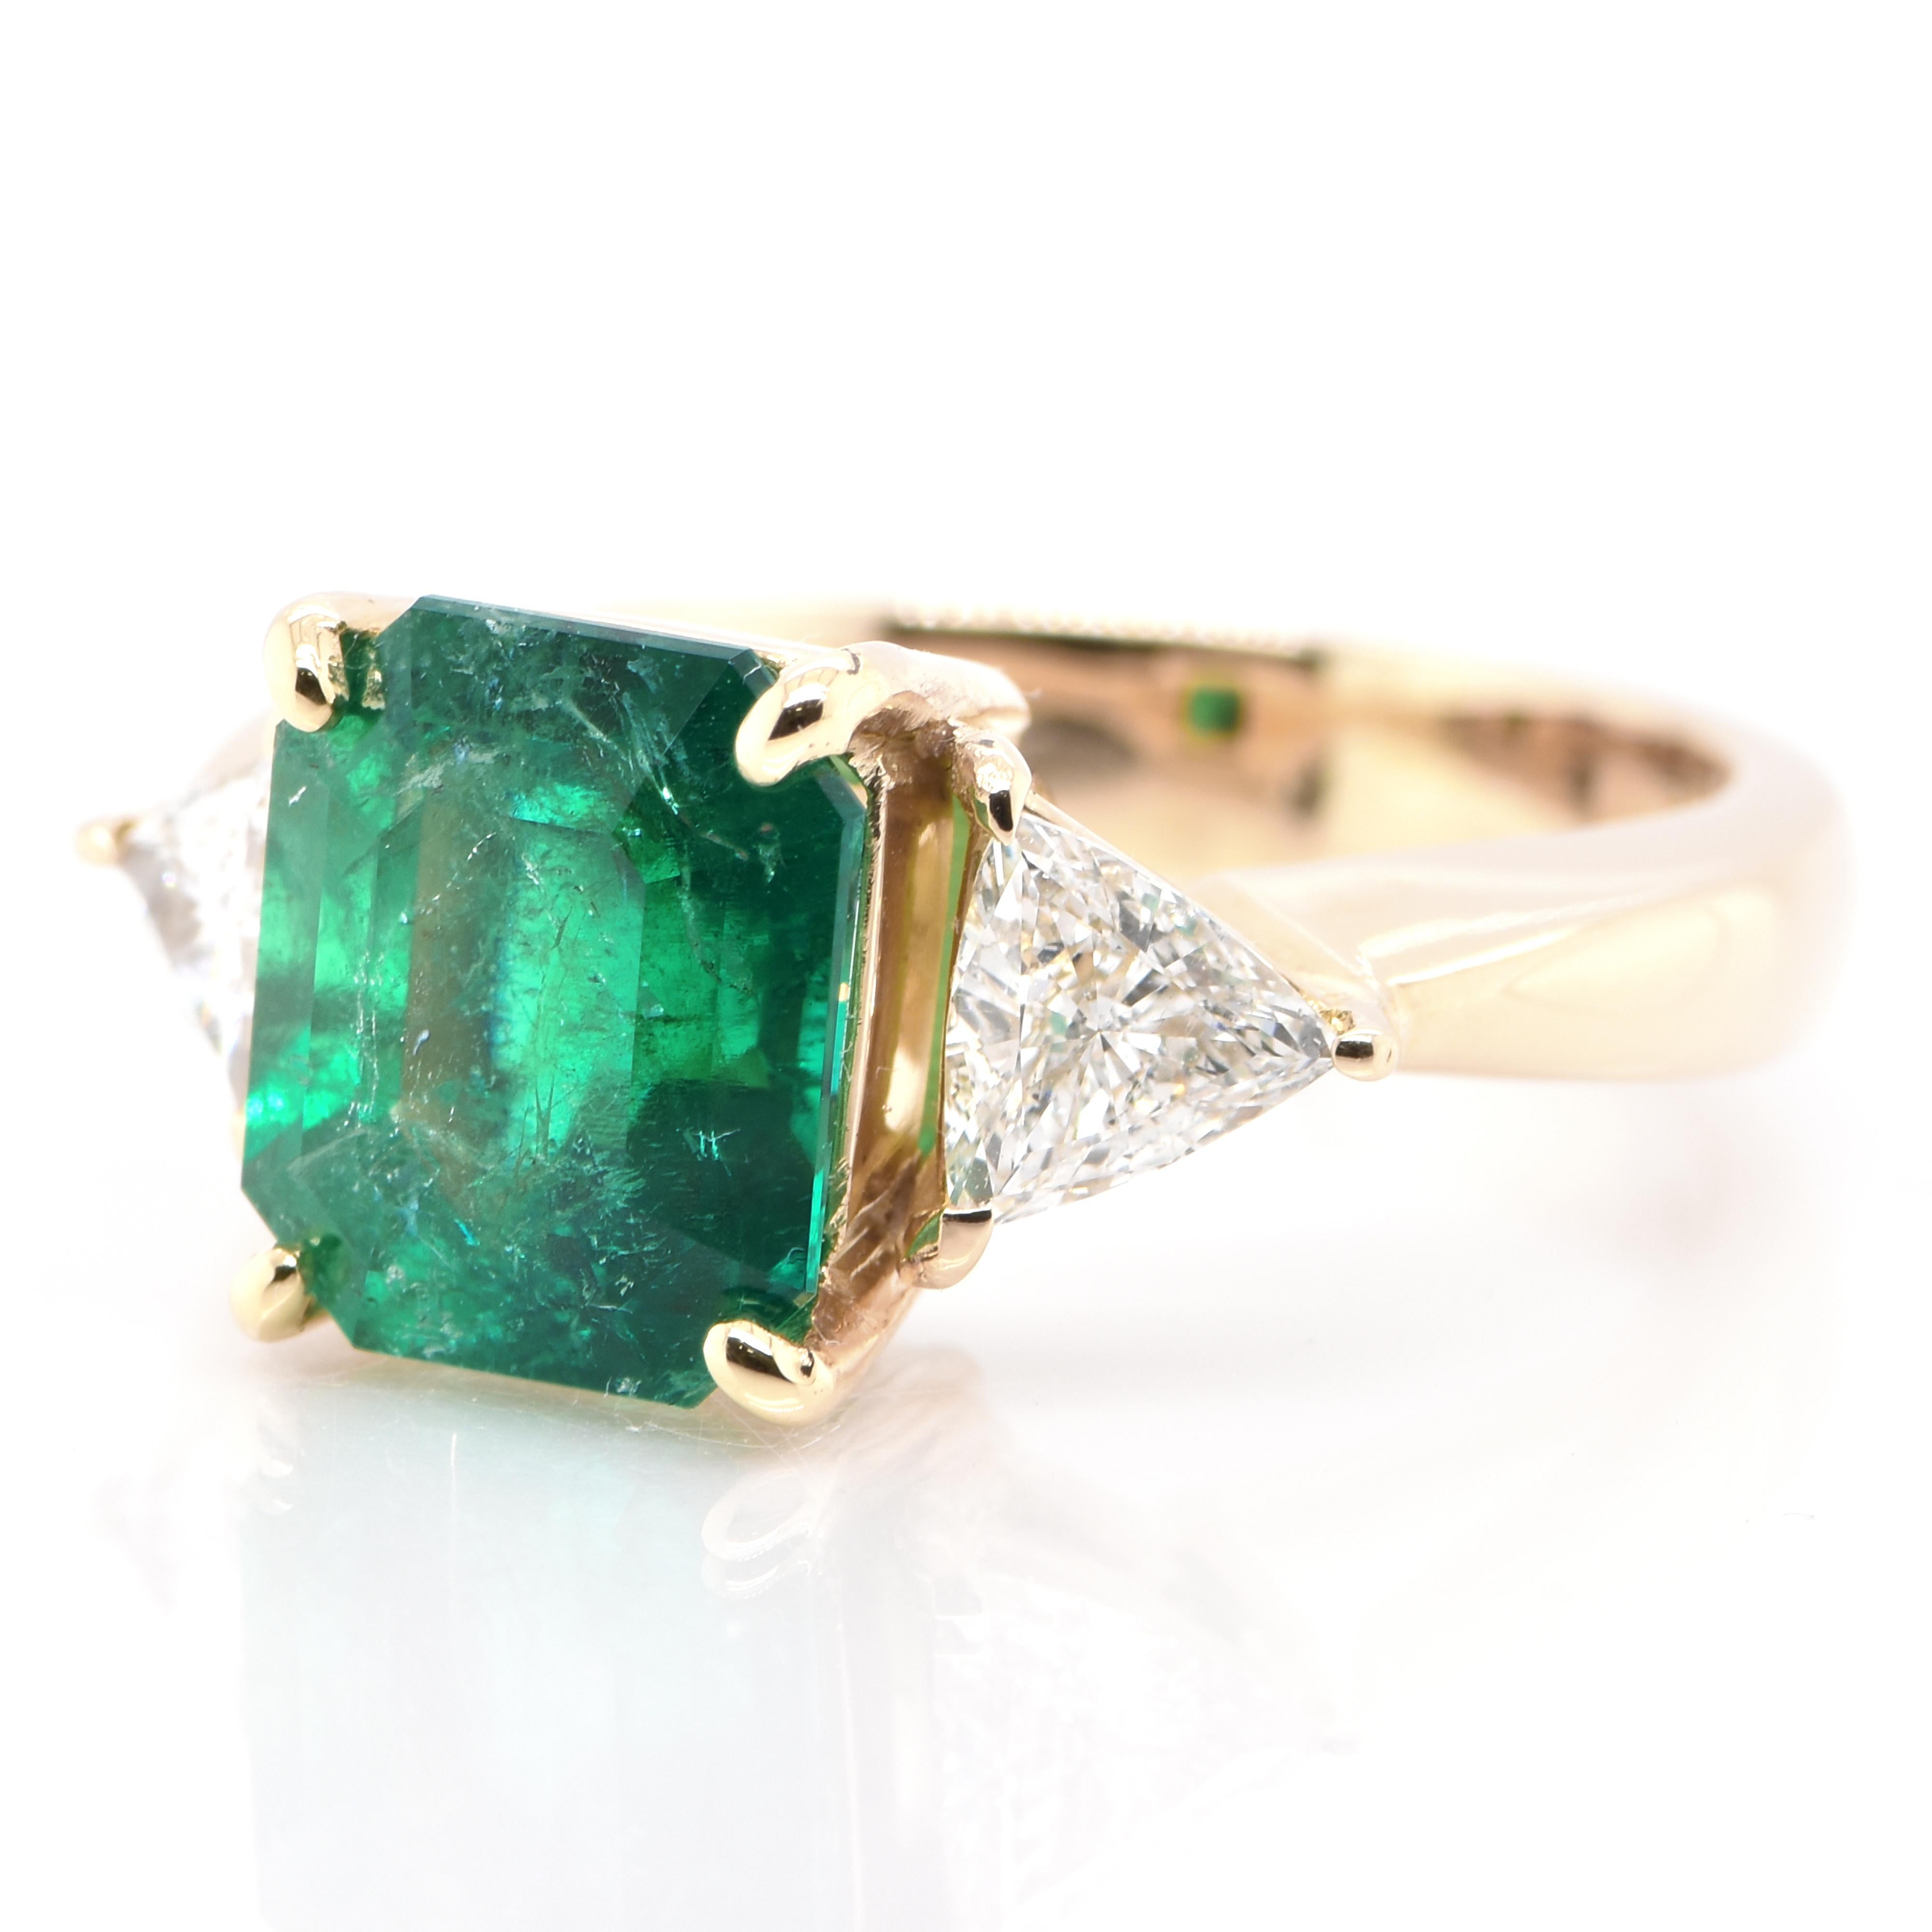 A stunning Three-Stone Ring featuring a 4.80 Carat, Natural, Colombian Emerald and 0.64 Carats of Diamond Accents set in 18K Yellow Gold. People have admired emerald’s green for thousands of years. Emeralds have always been associated with the